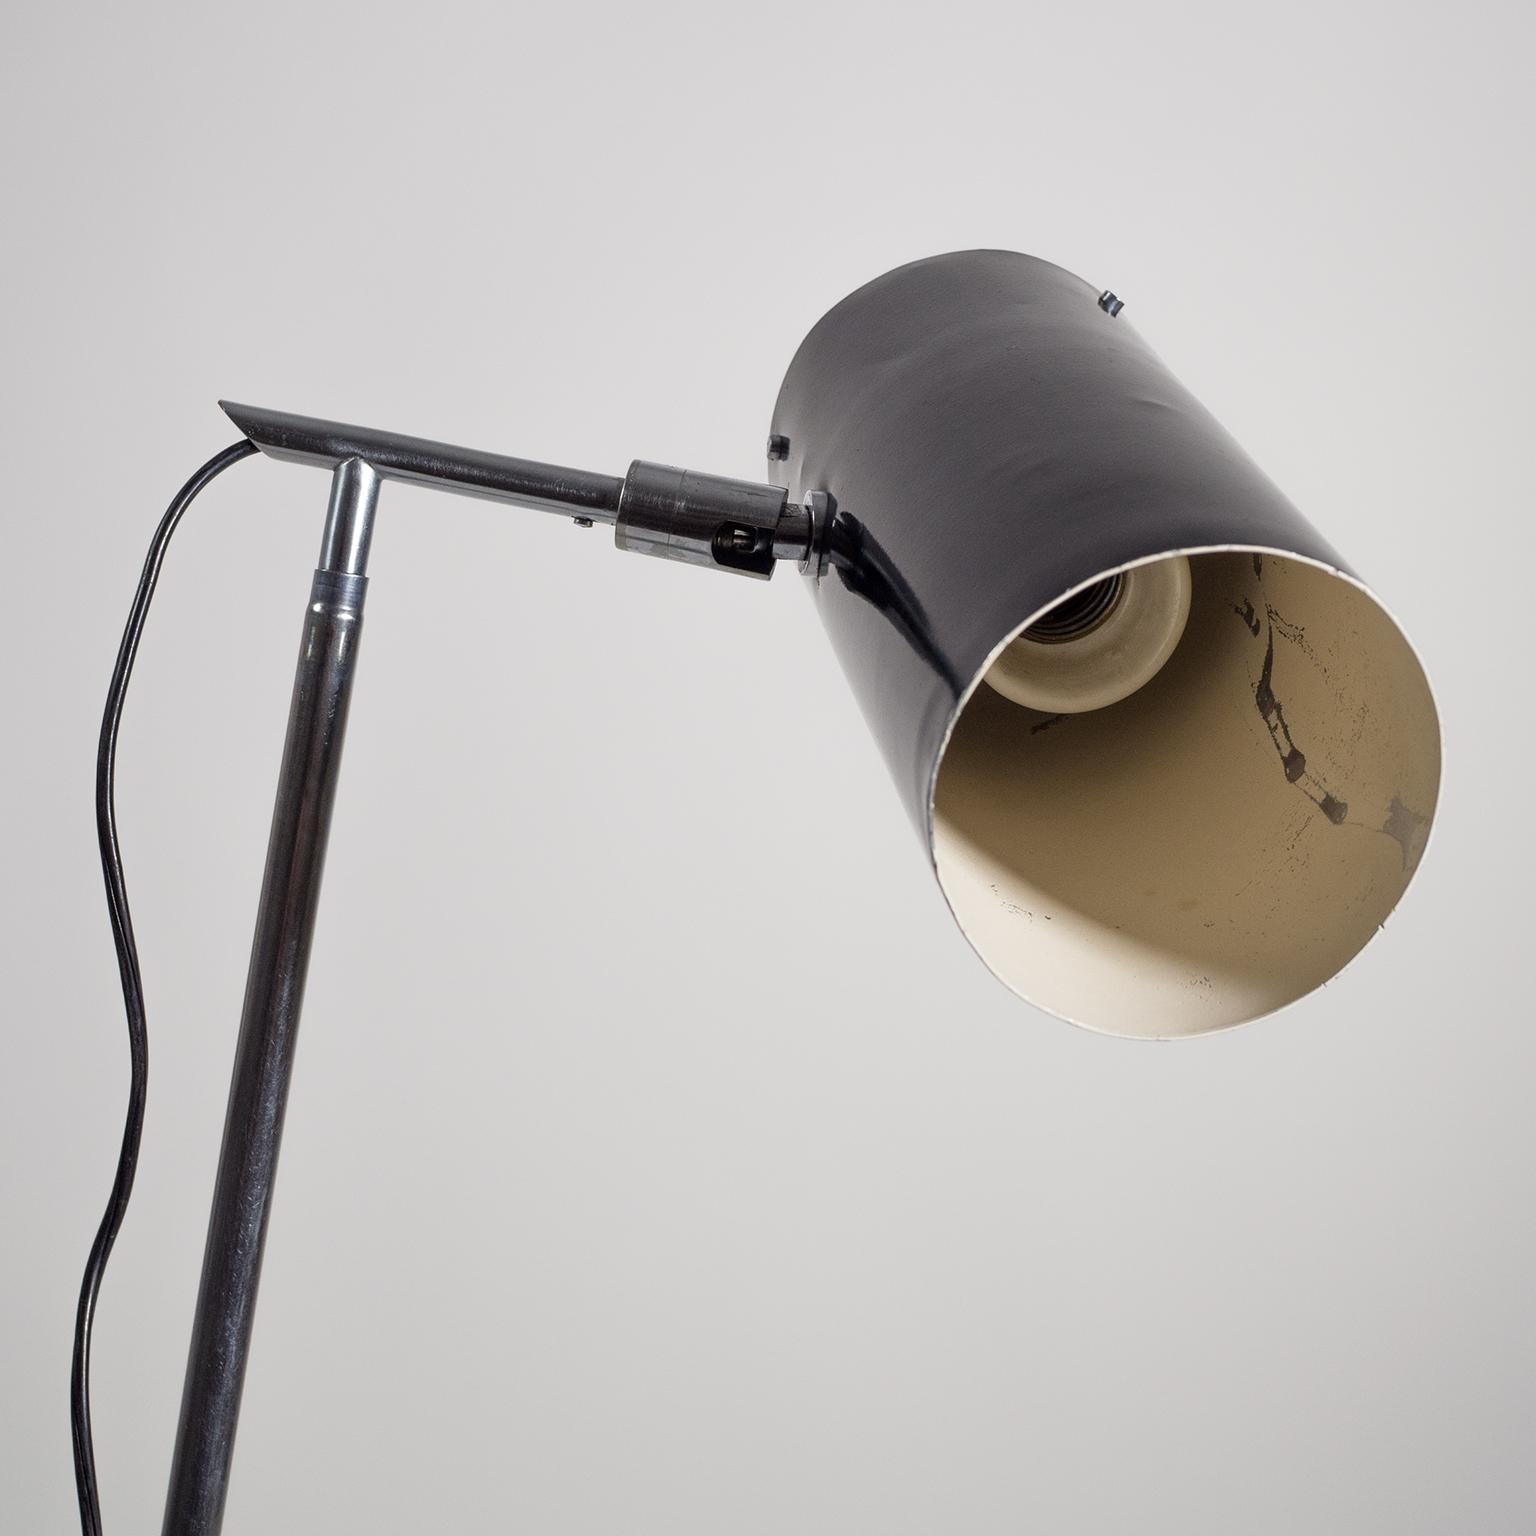 O'Luce 201 Telescopic Floor Lamp by Ostuni and Forti, circa 1950 2